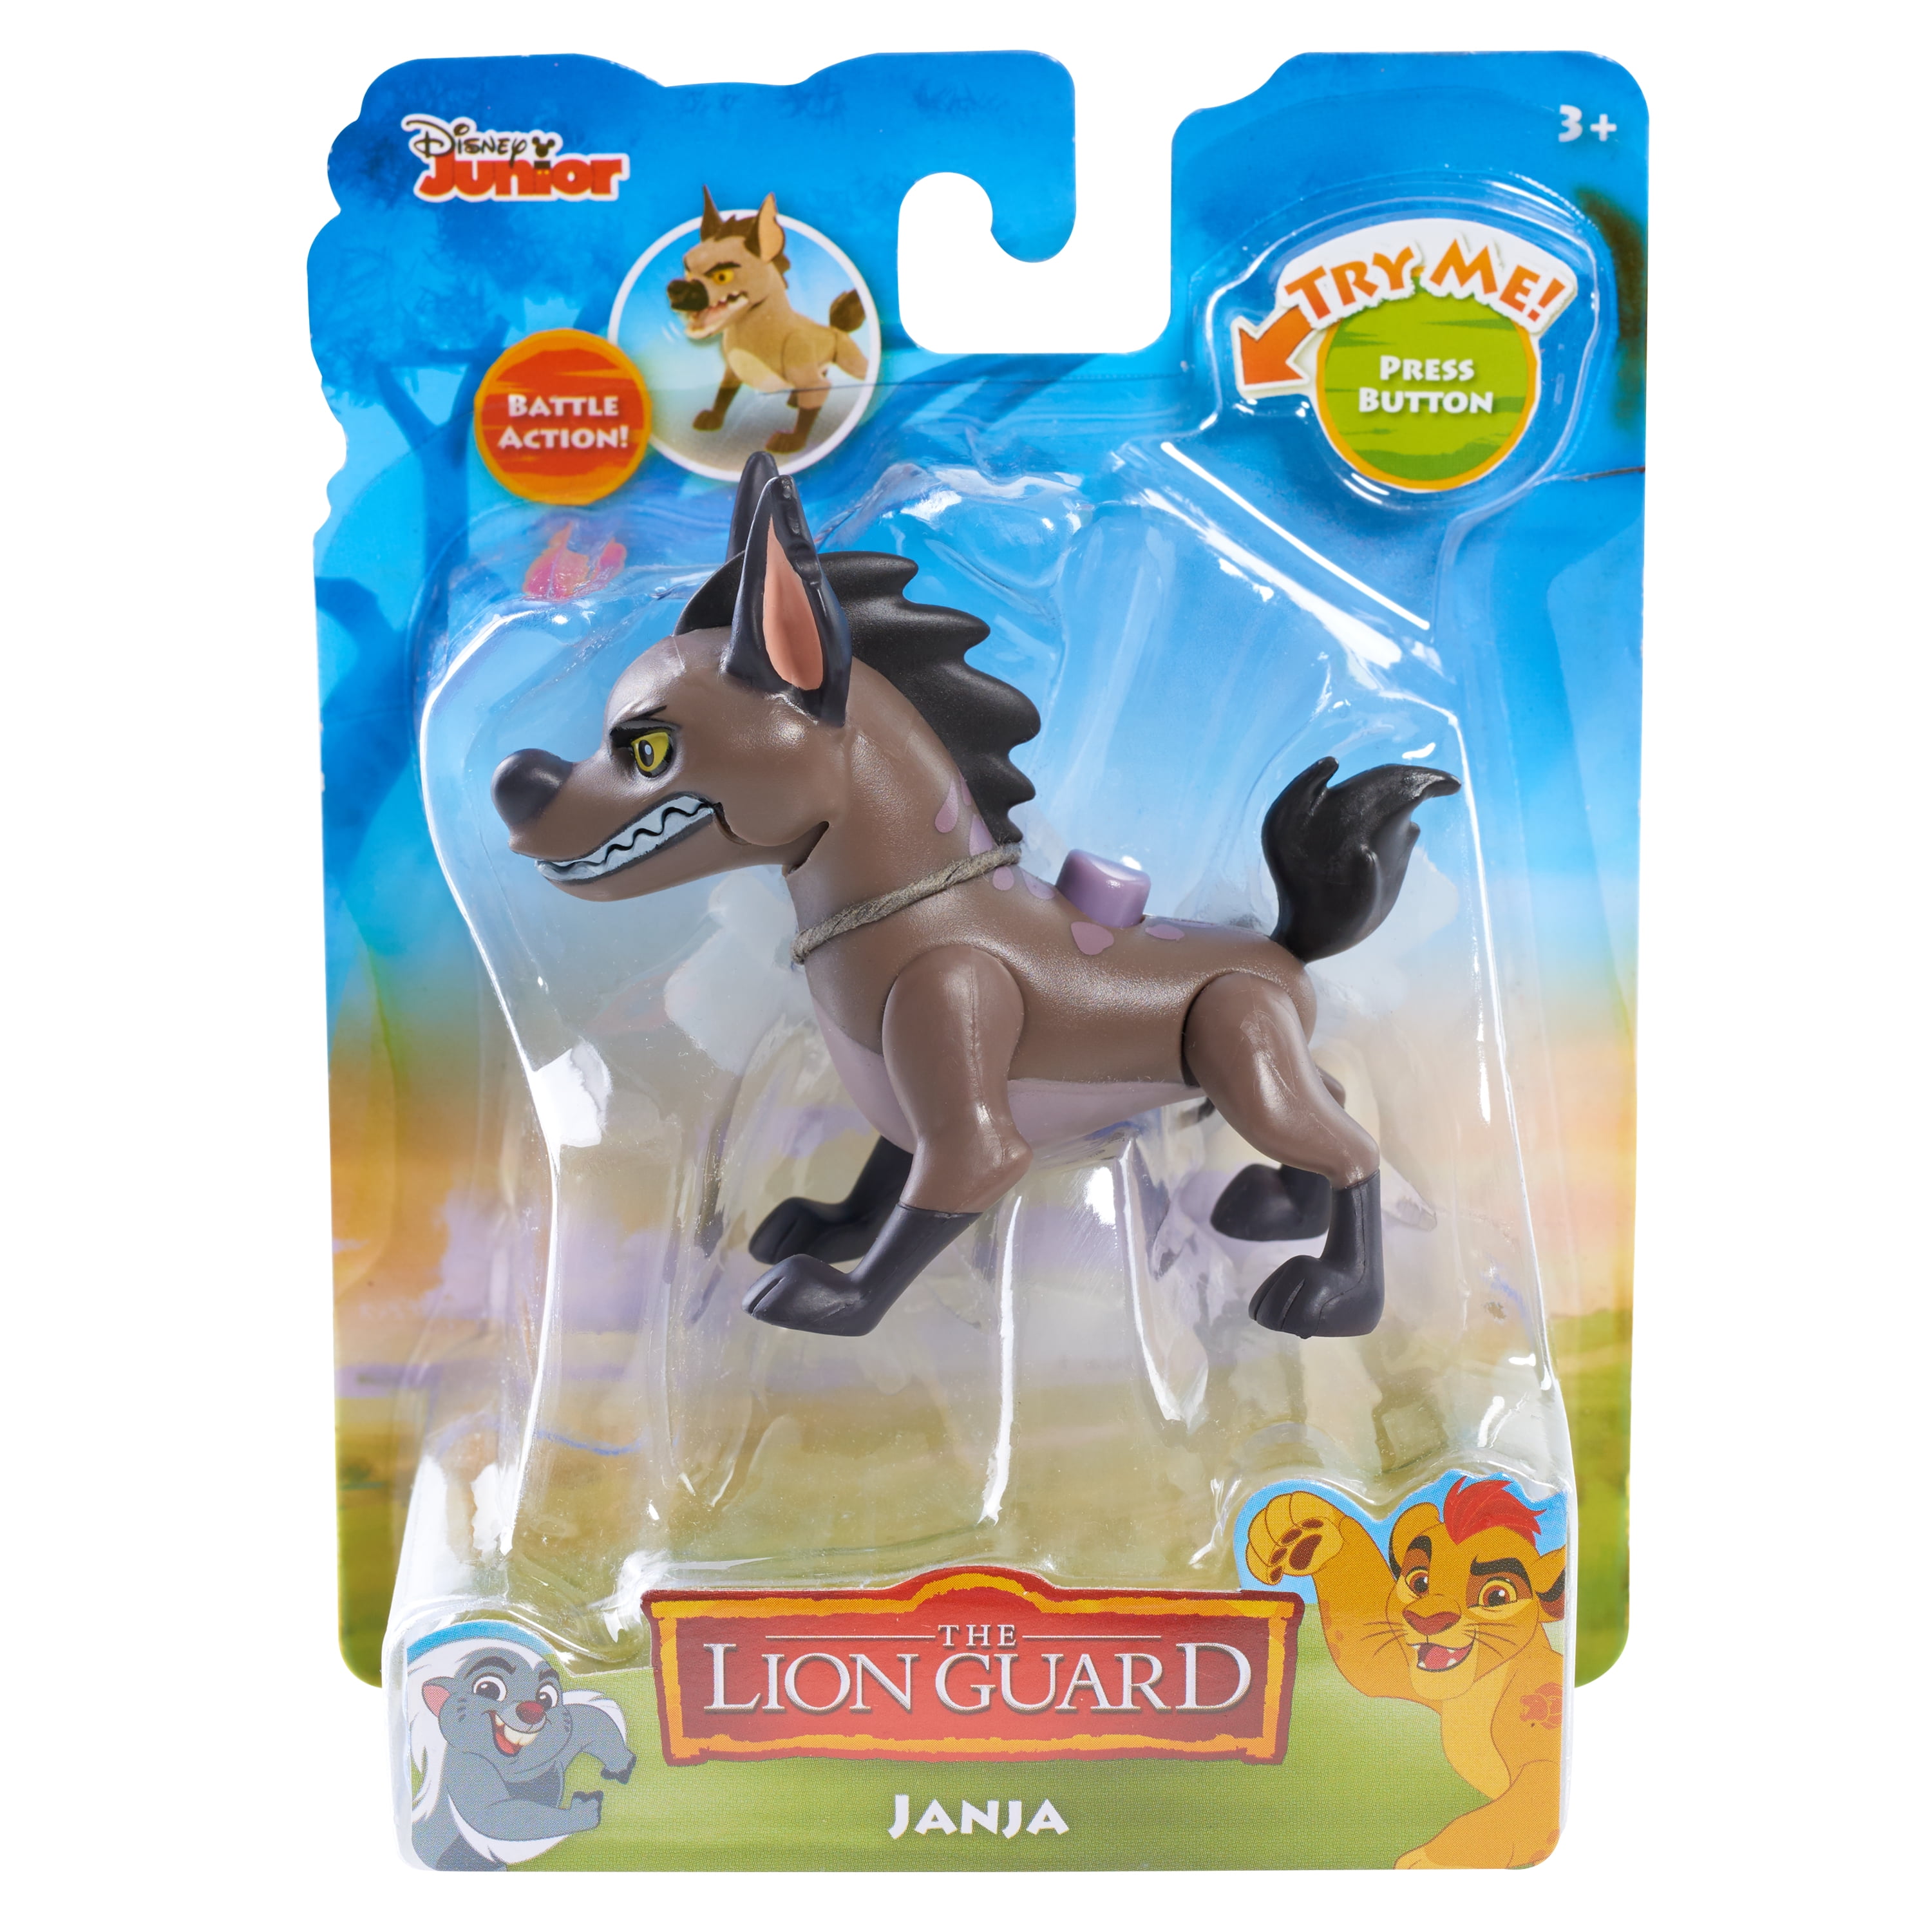 Collection 104+ Images pictures of lion guard toys Stunning